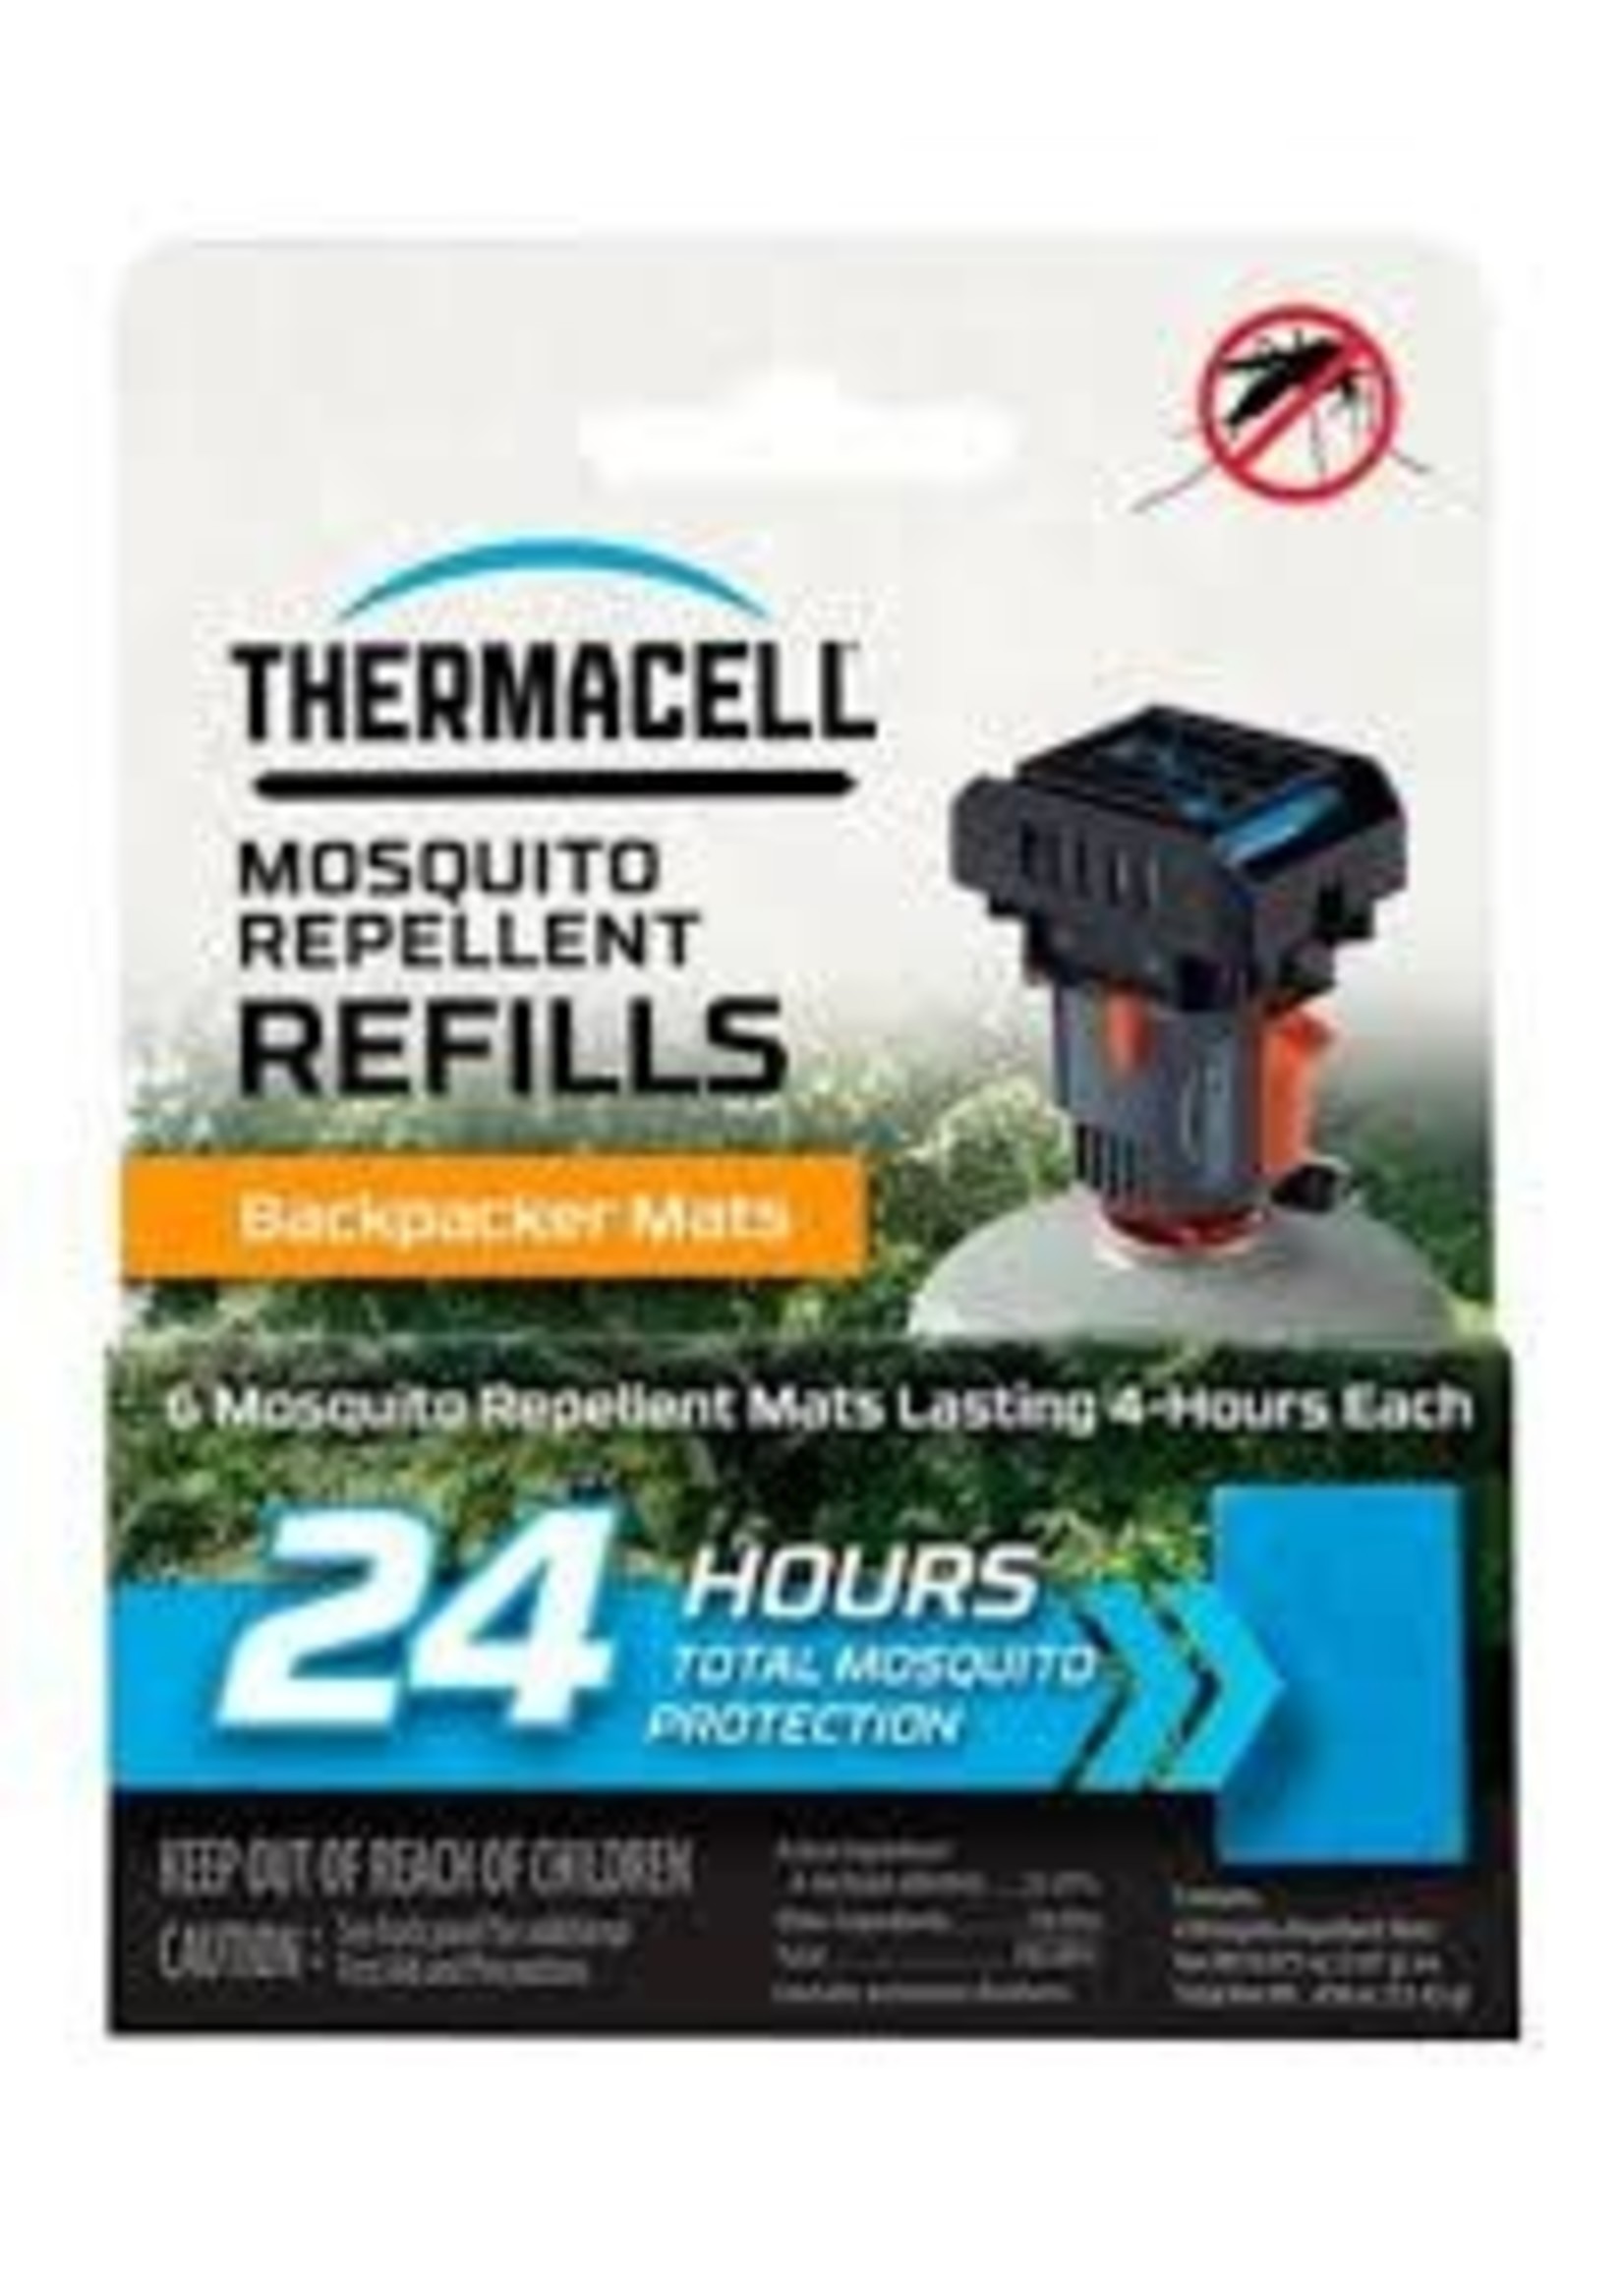 THERMACELL THERMACELL MOSQUITO AREA REPELLENT BACK PACKER